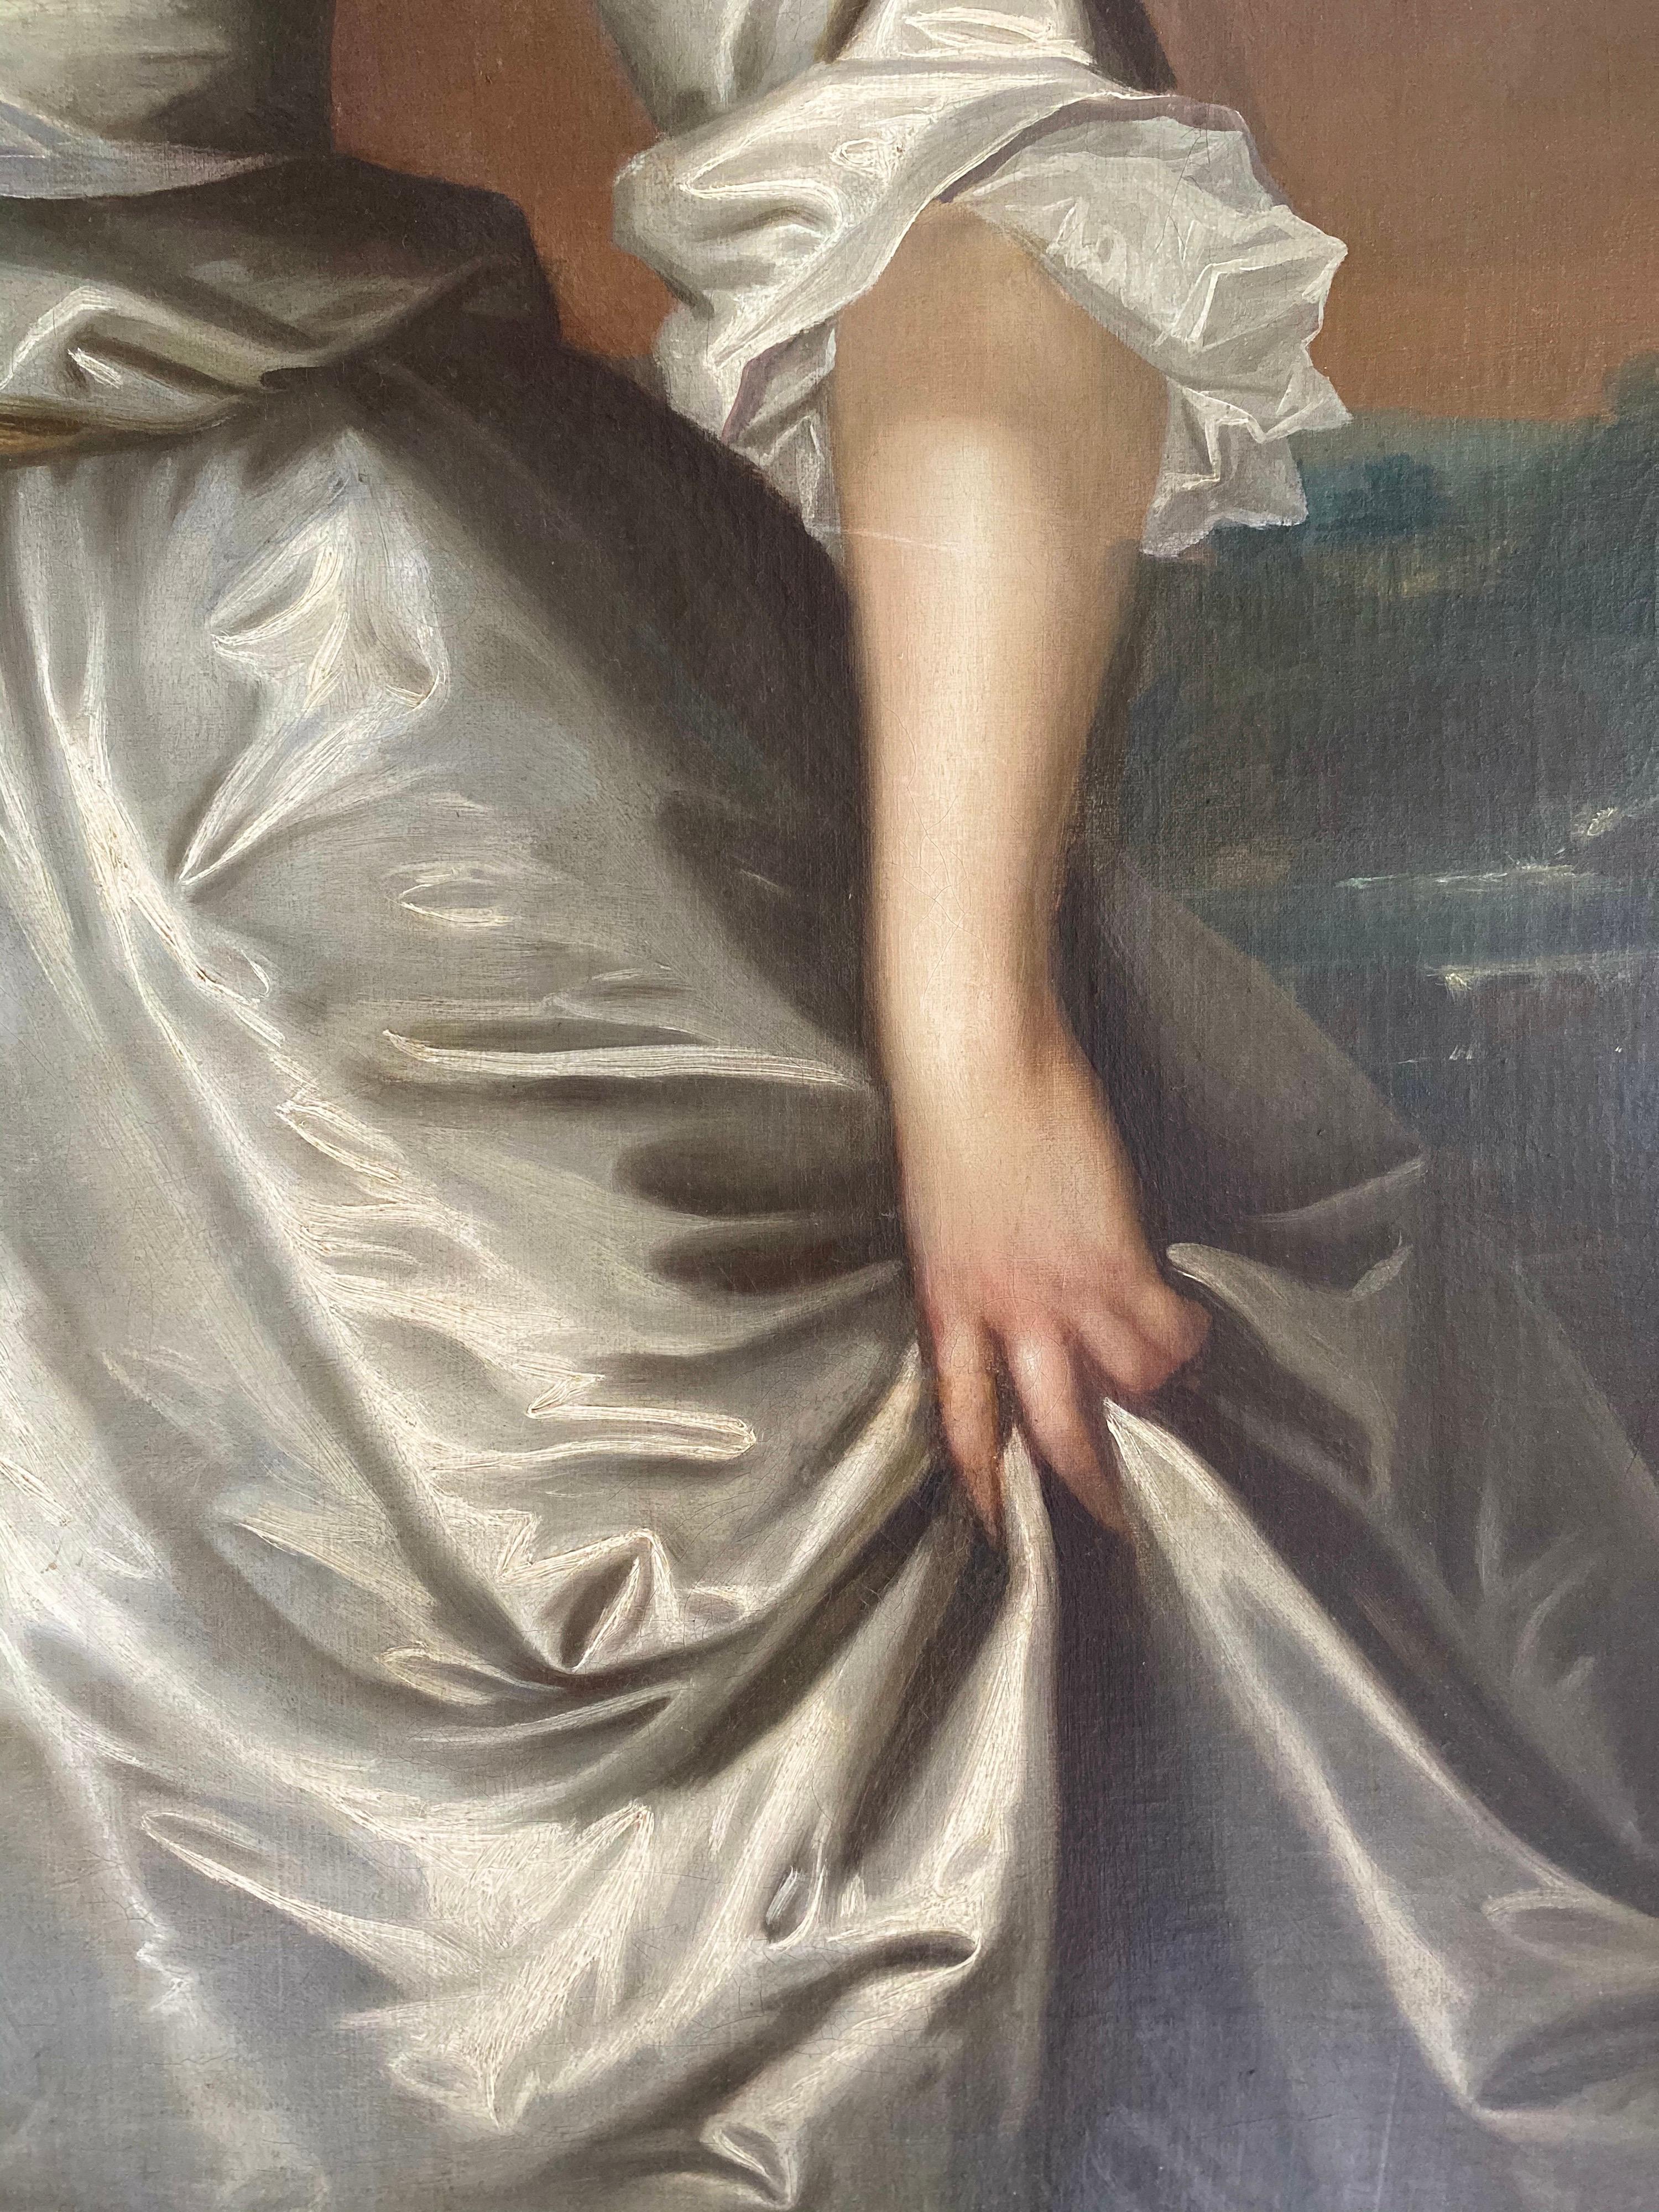 Portrait of Henrietta Pelham-Holles (née Godolphin) (1701-1776), Duchess of Newcastle, standing in a wooded landscape with a river beyond, three-quarter length wearing an ivory silk gown holding a sprig of flowers in her hand. Inscribed lower left